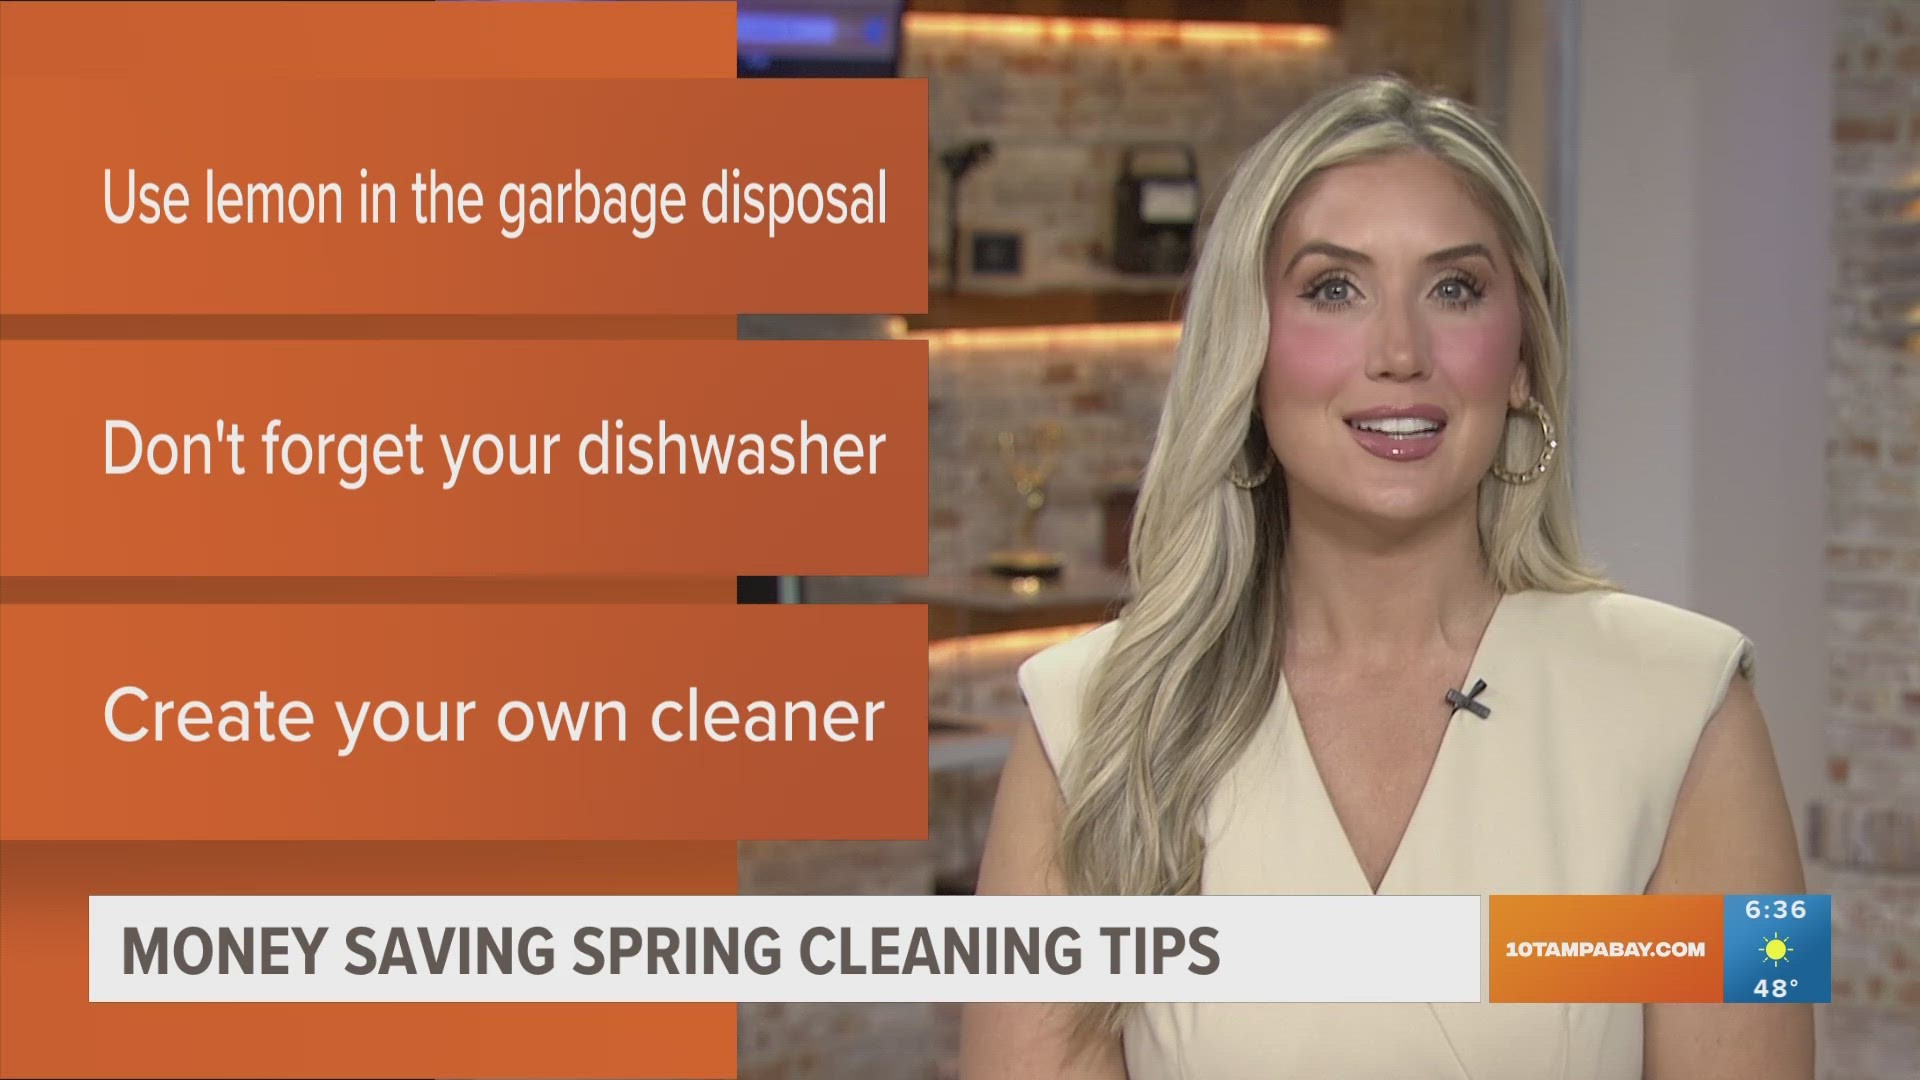 From cleaning your garbage disposal to a homemade cleaner to cut through grease, here are a few ways to save a few bucks while cleaning your home.